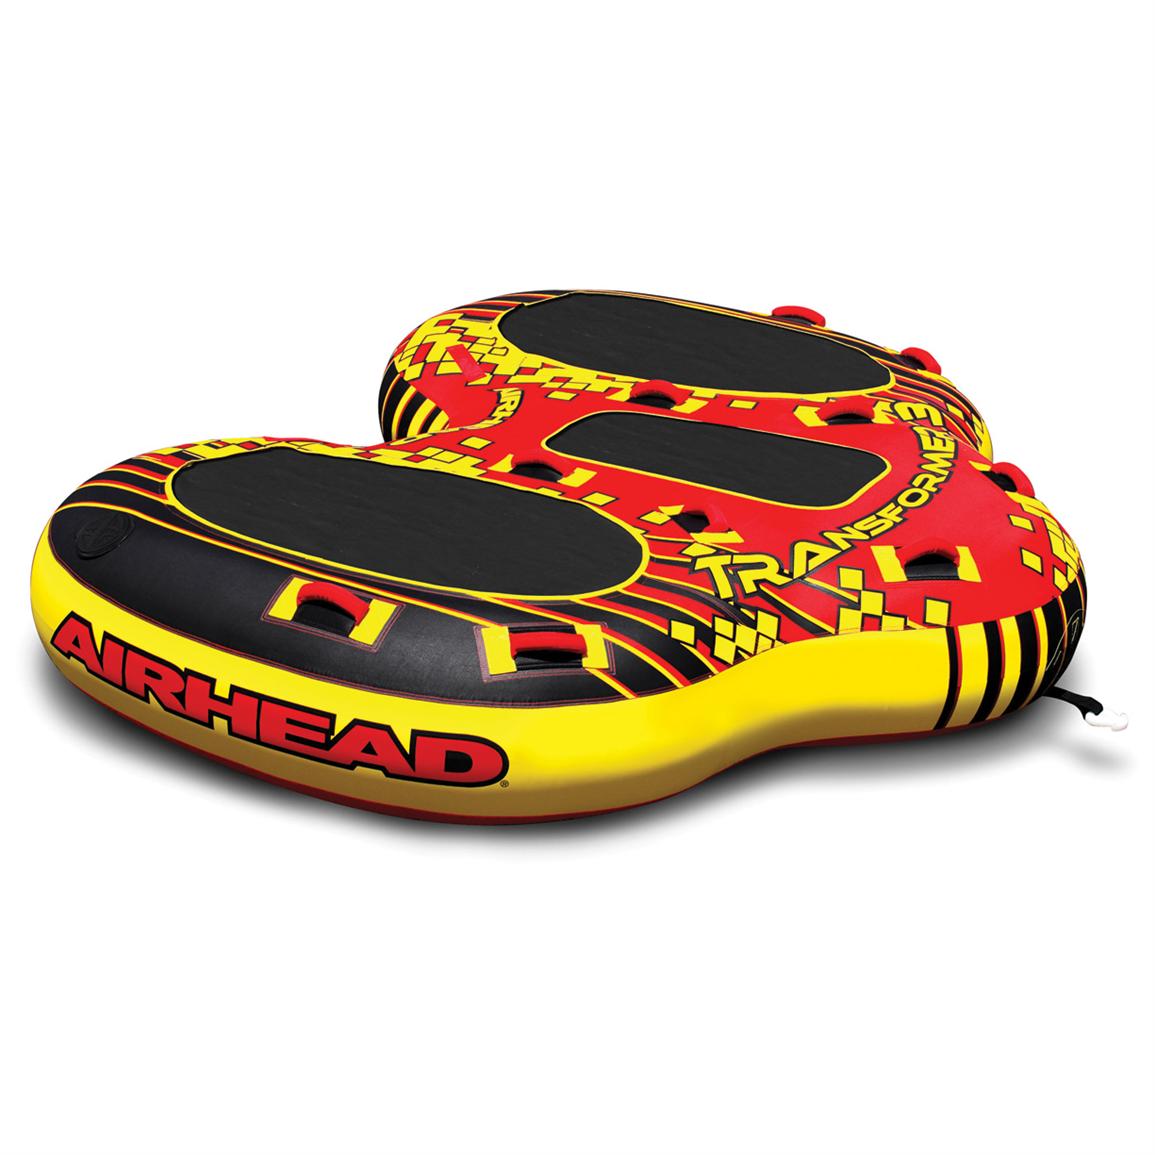 Airhead® Transformer 3rider Towable Tube 296403, Tubes & Towables at